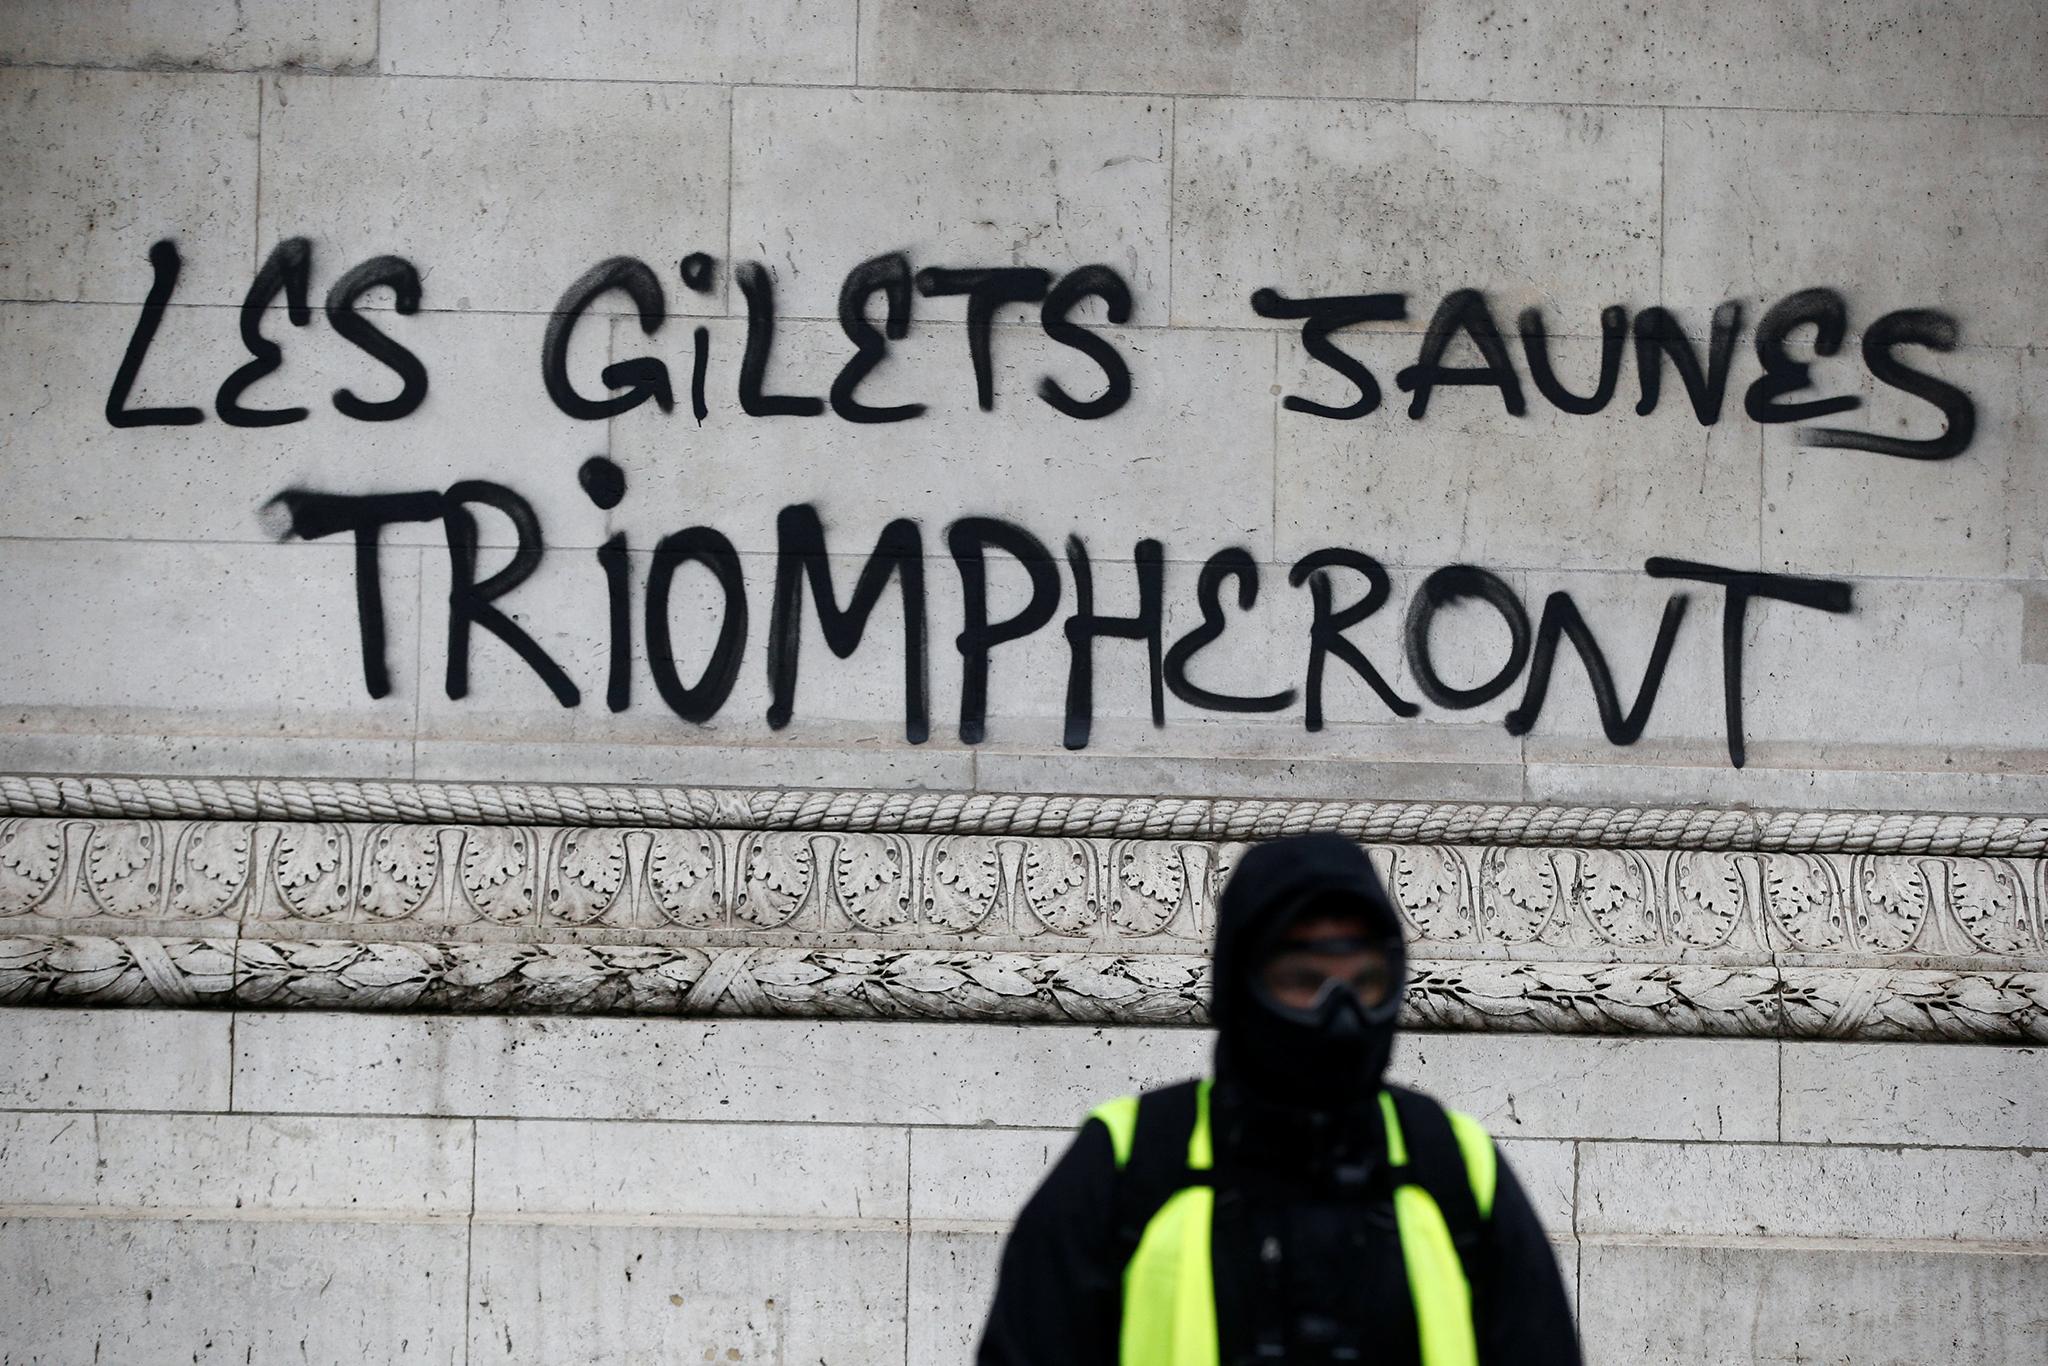 The yellow vests will triumph is scrawled across the Arc de?Triomphe